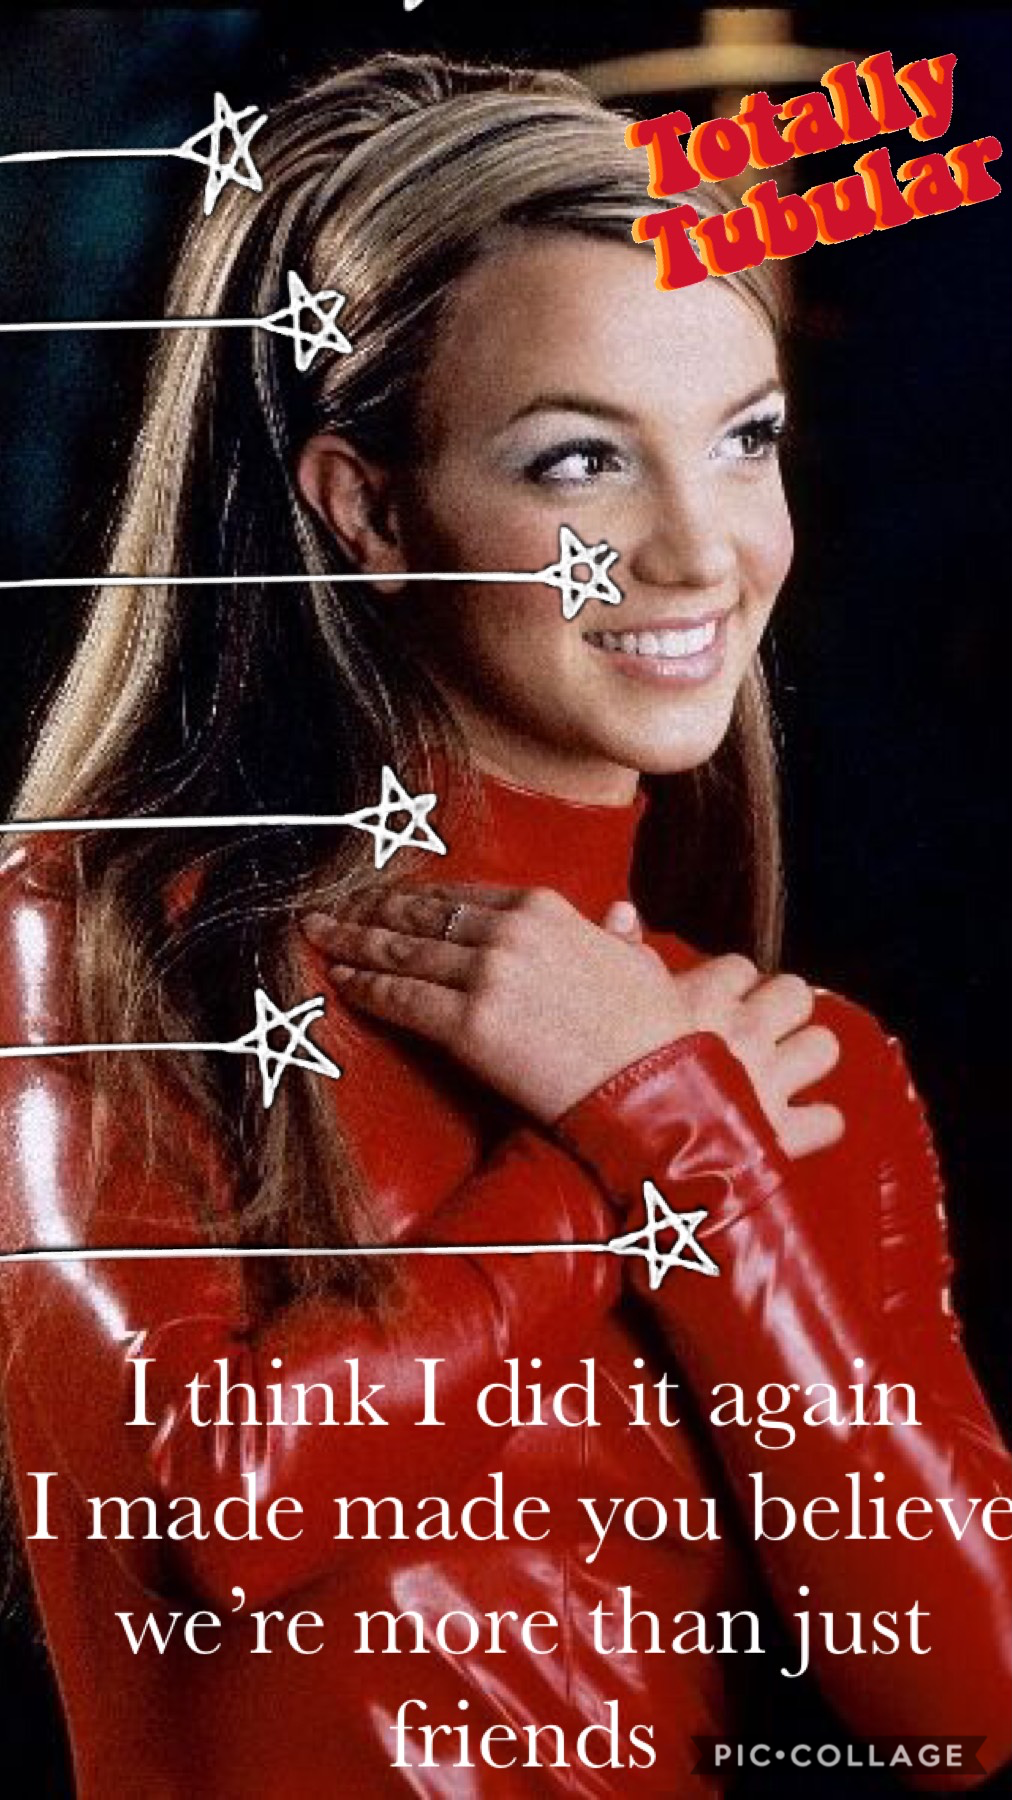 Oops I did it again- Britney Spears 